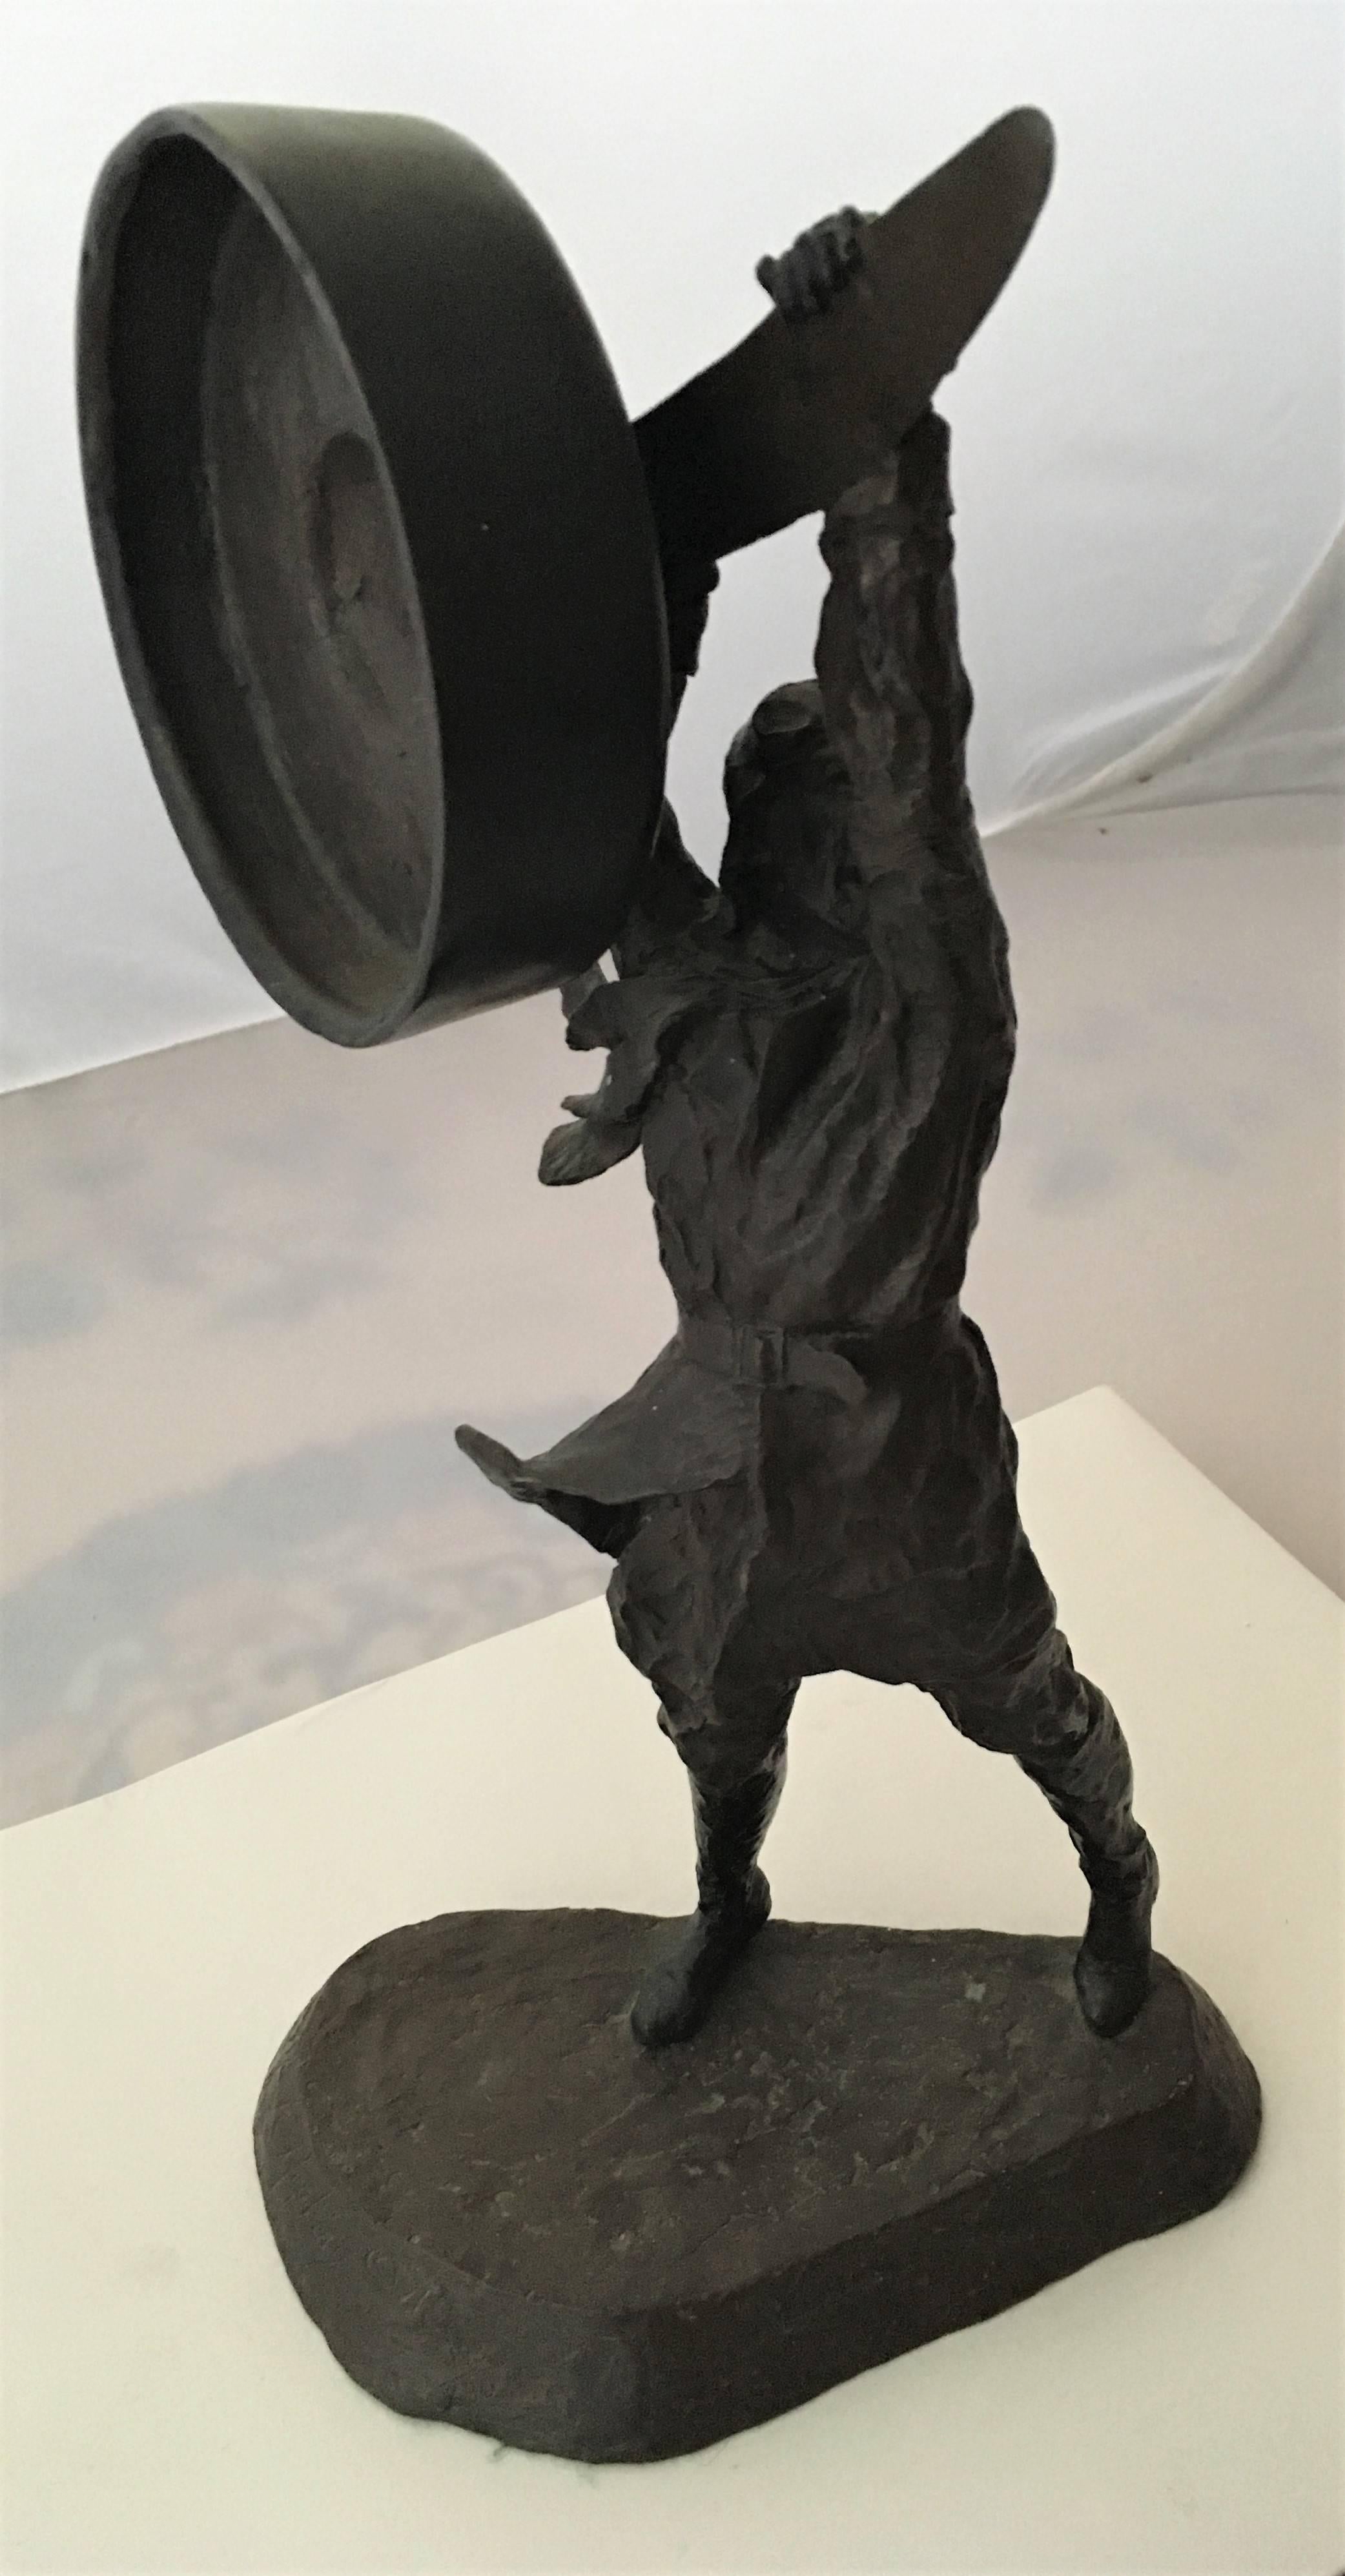 Cast bronze sculpture of an early aviator by Mark Hopkins, 1991, depicting a World War I era pilot in leather helmet and boots, poised to swing his propeller. Cast in a limited run, this one #193/750. Signed and numbered by artist on base.